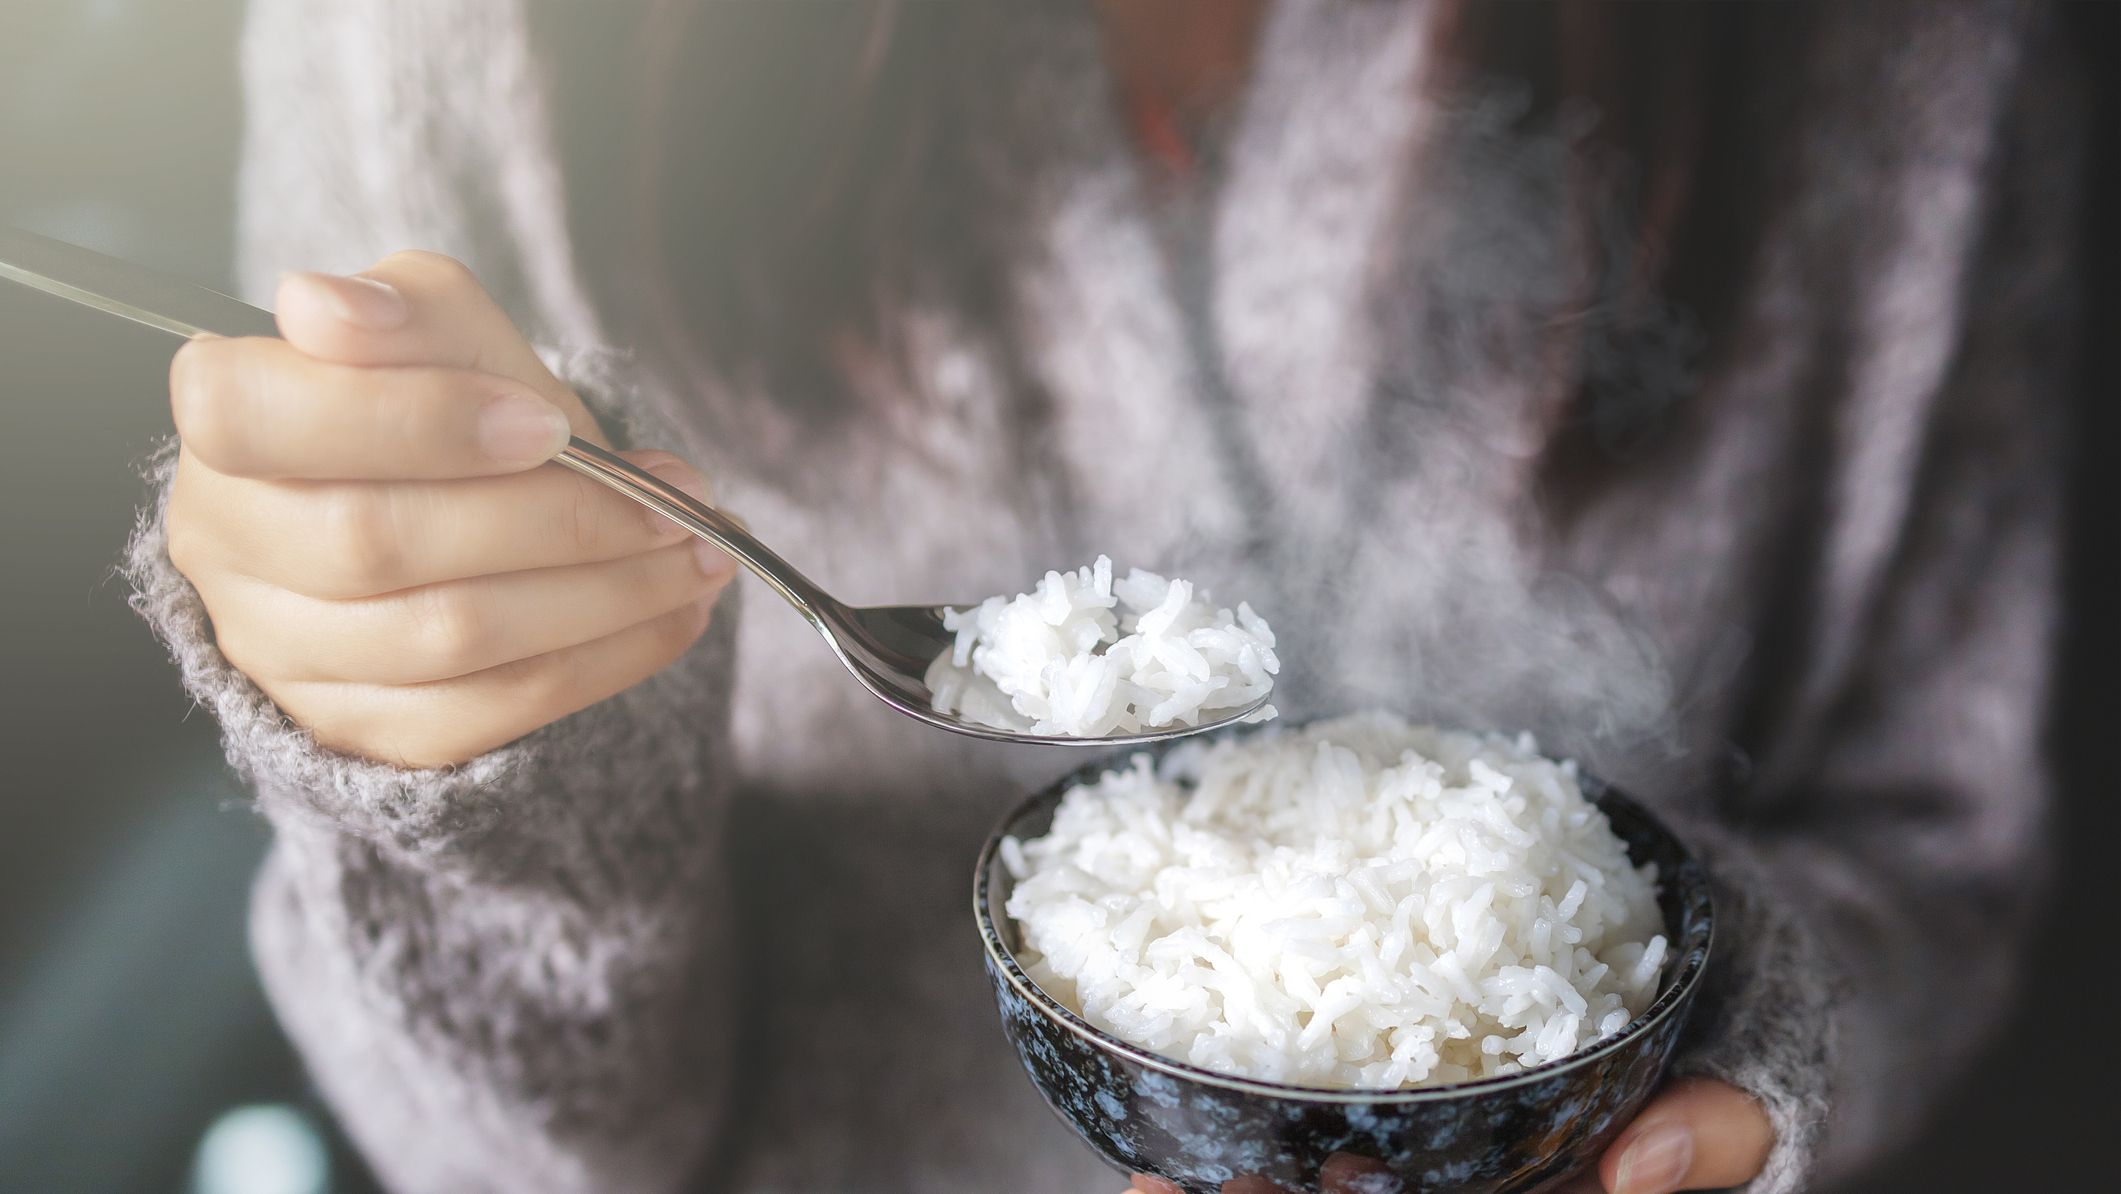 Can I Eat Rice After Wisdom Teeth Removal?